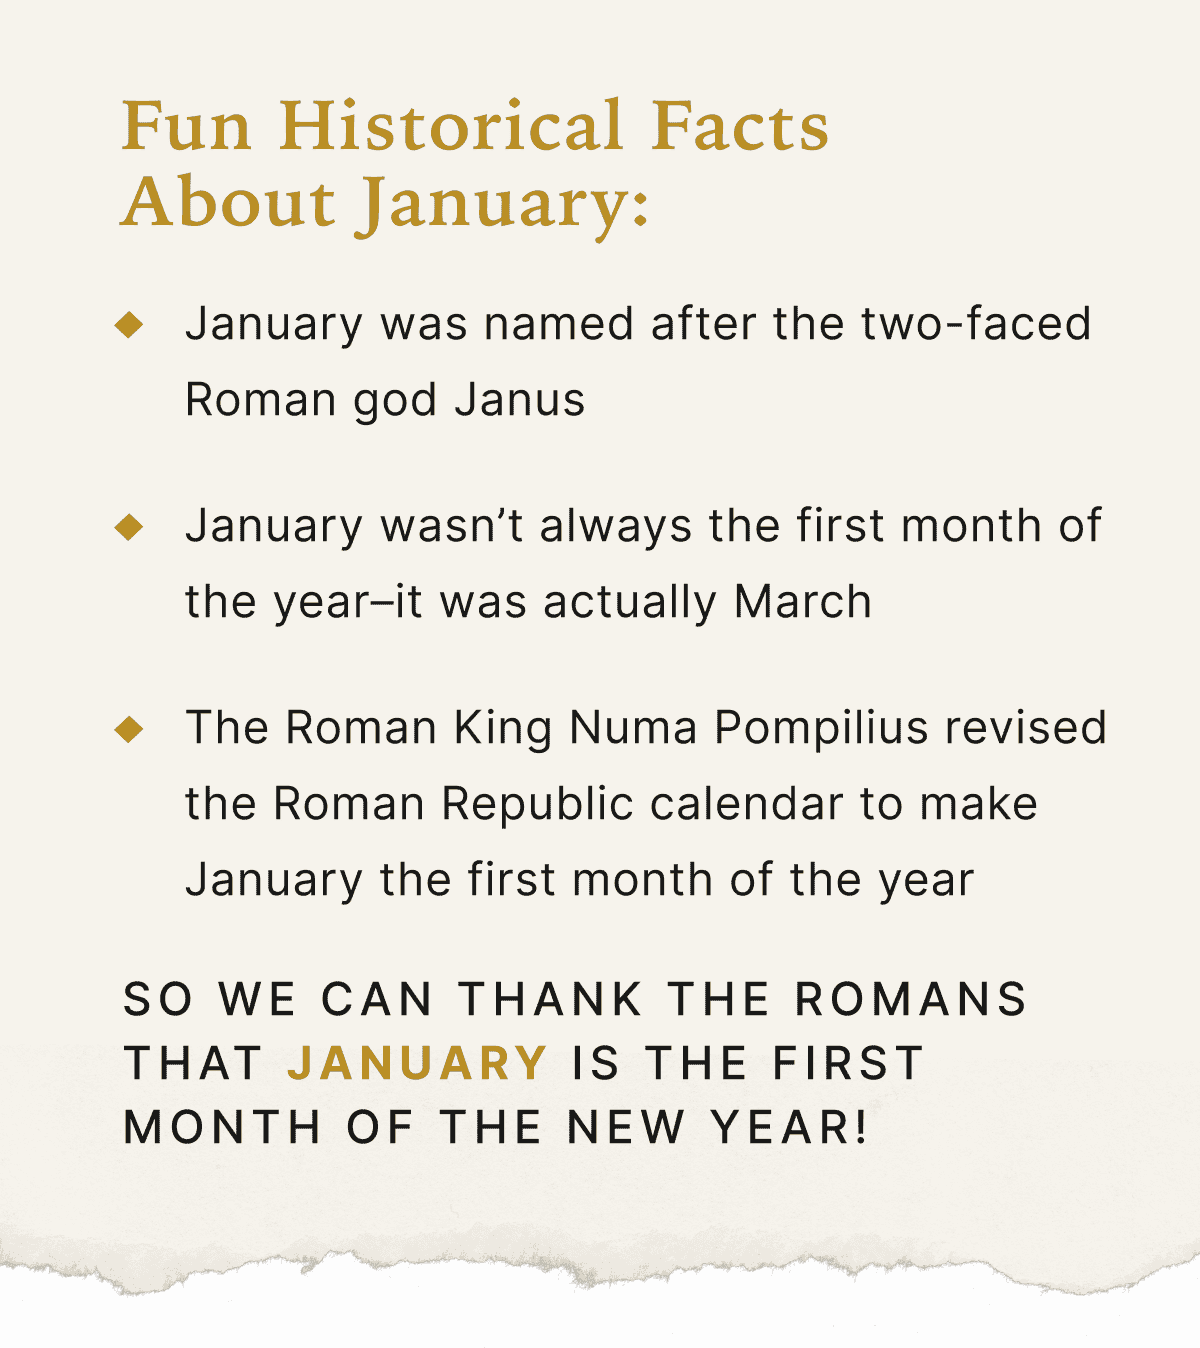 Fun Historical Facts About January: